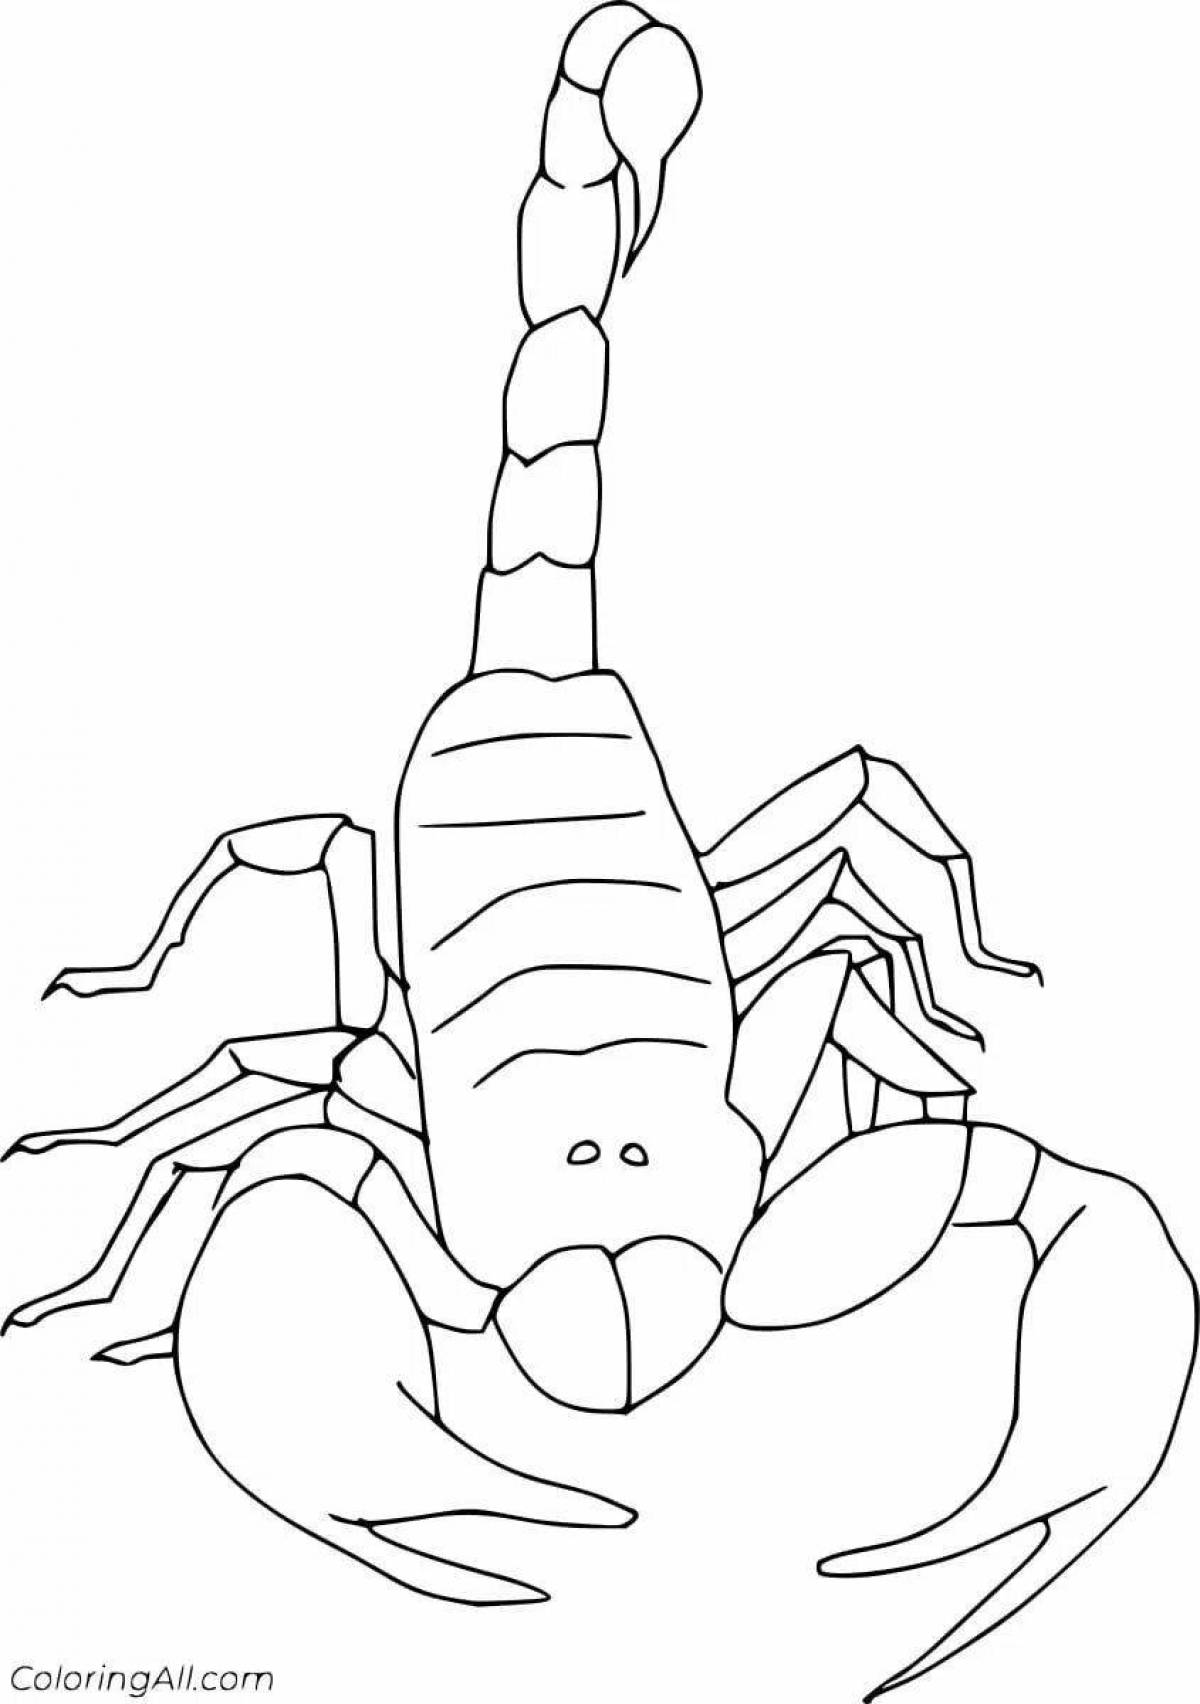 Glorious scorpion coloring pages for kids